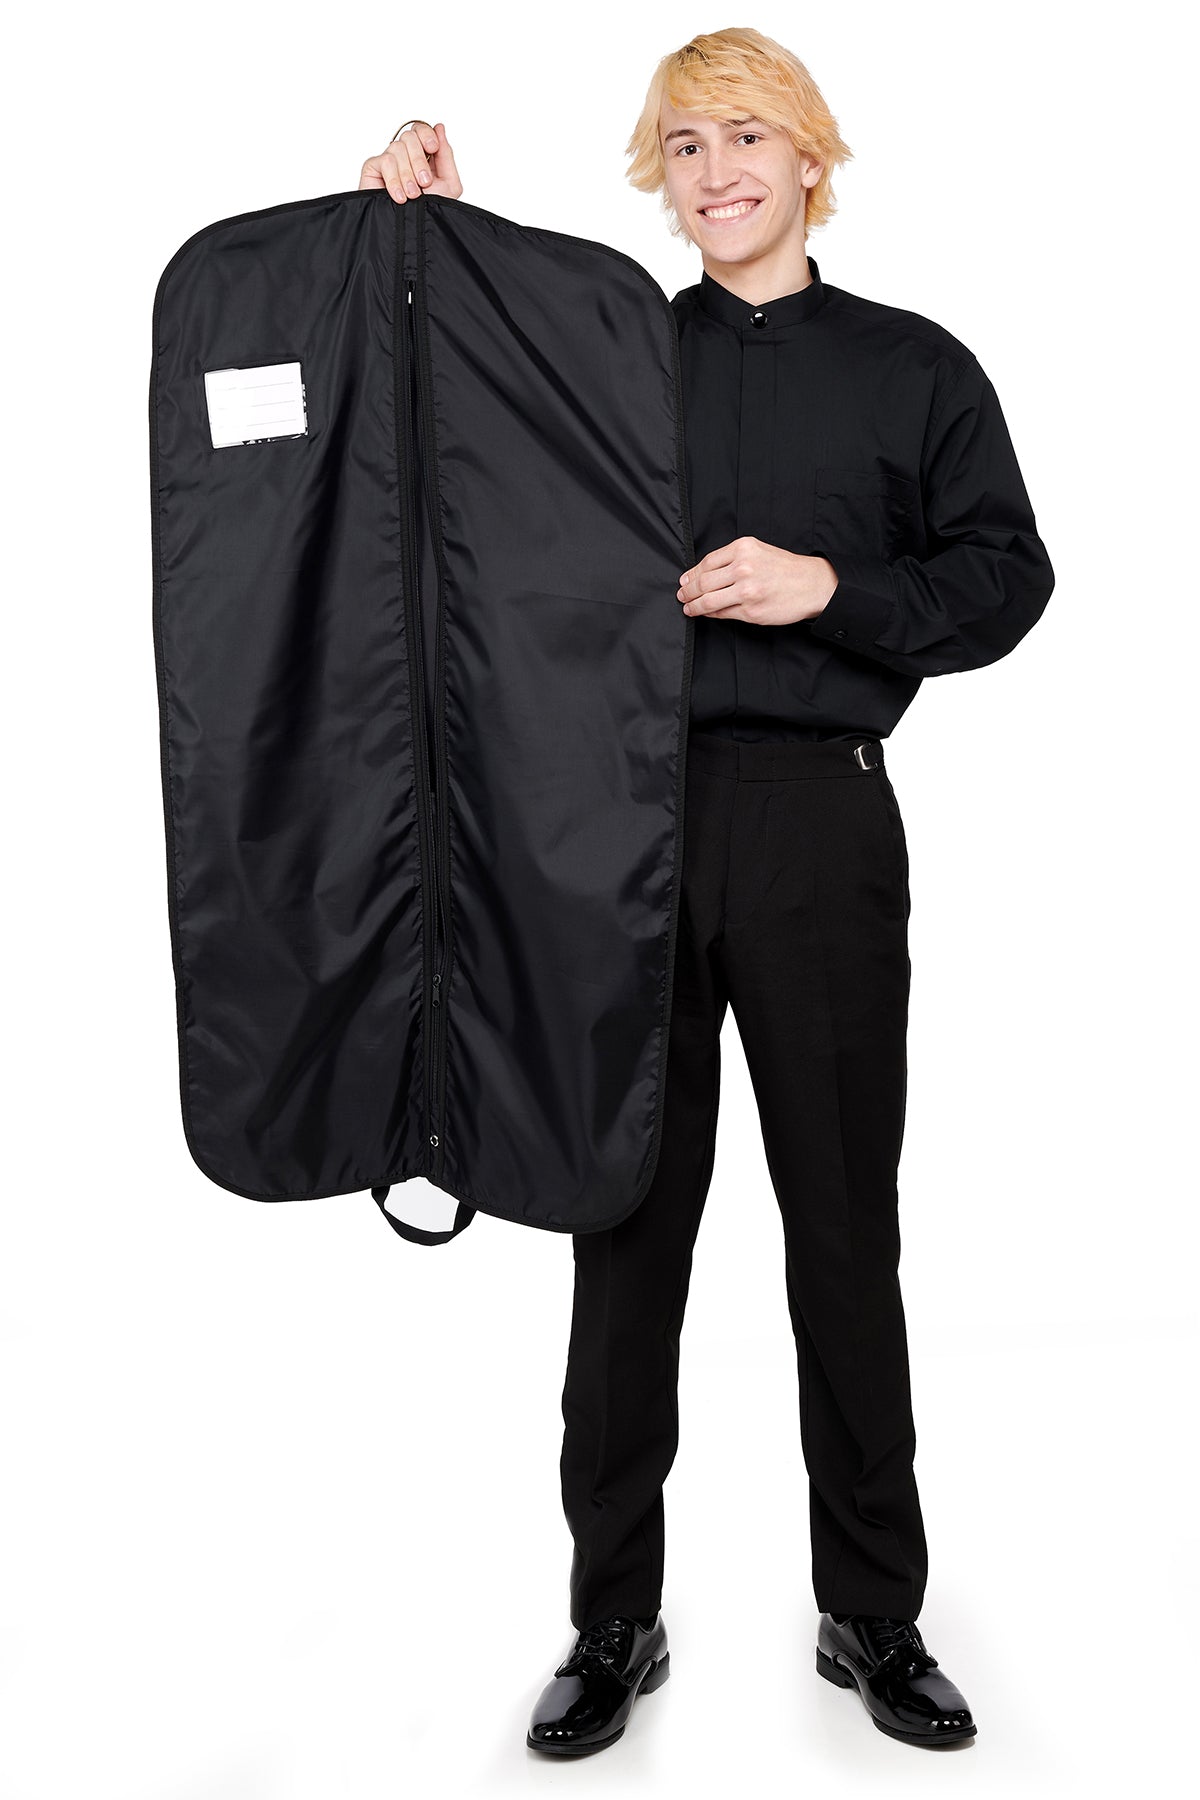 GB6044 - 44" Encore Deluxe Travel Garment Bags with 2 Pouches